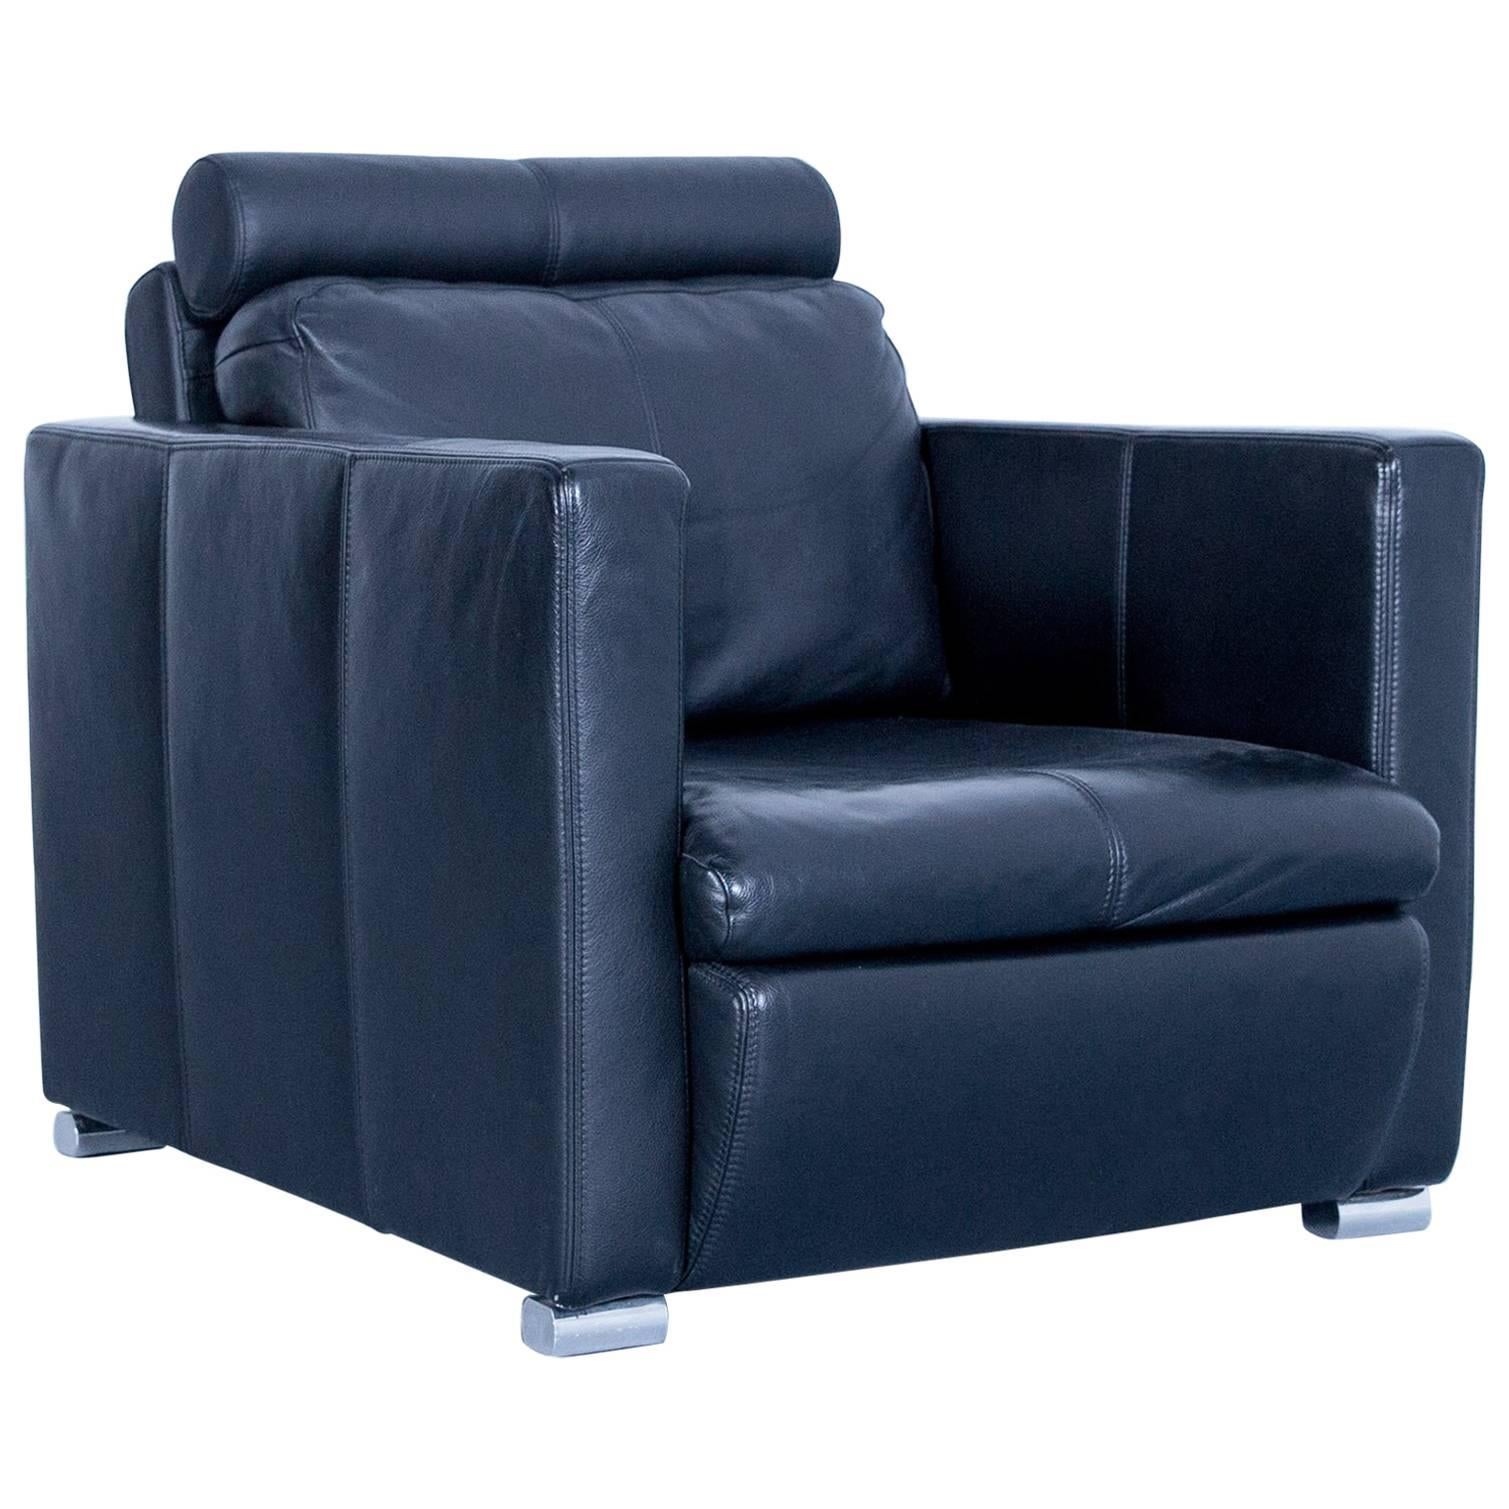 Designer Chair Leather Black Relax Function Couch Modern Minimal Metal